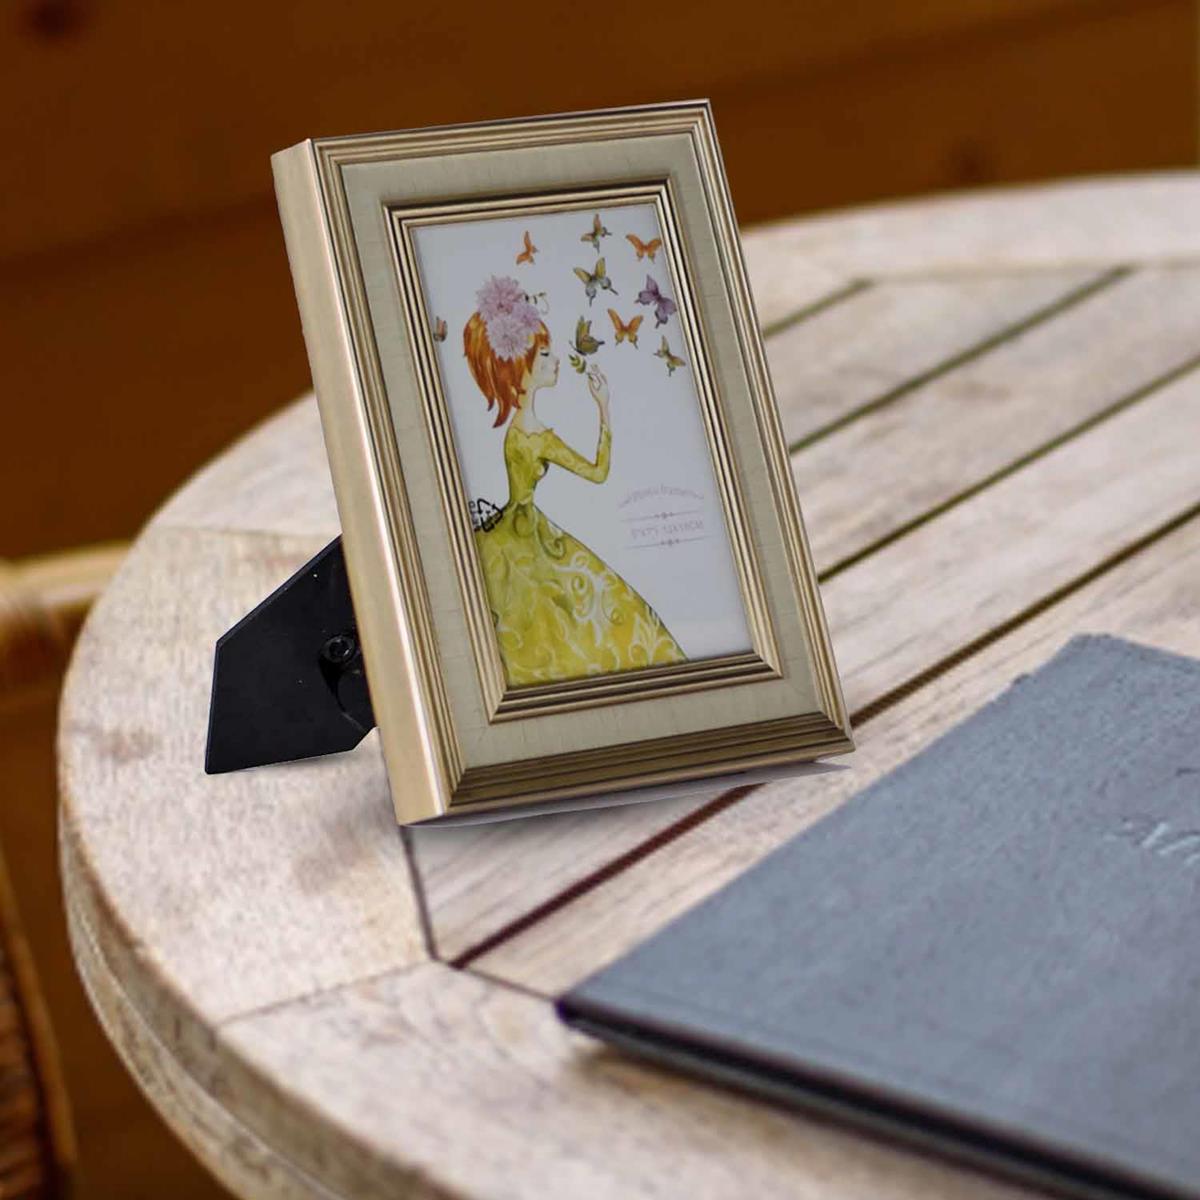 Wooden Border Photo Frame (4x6) inches (AR-5)